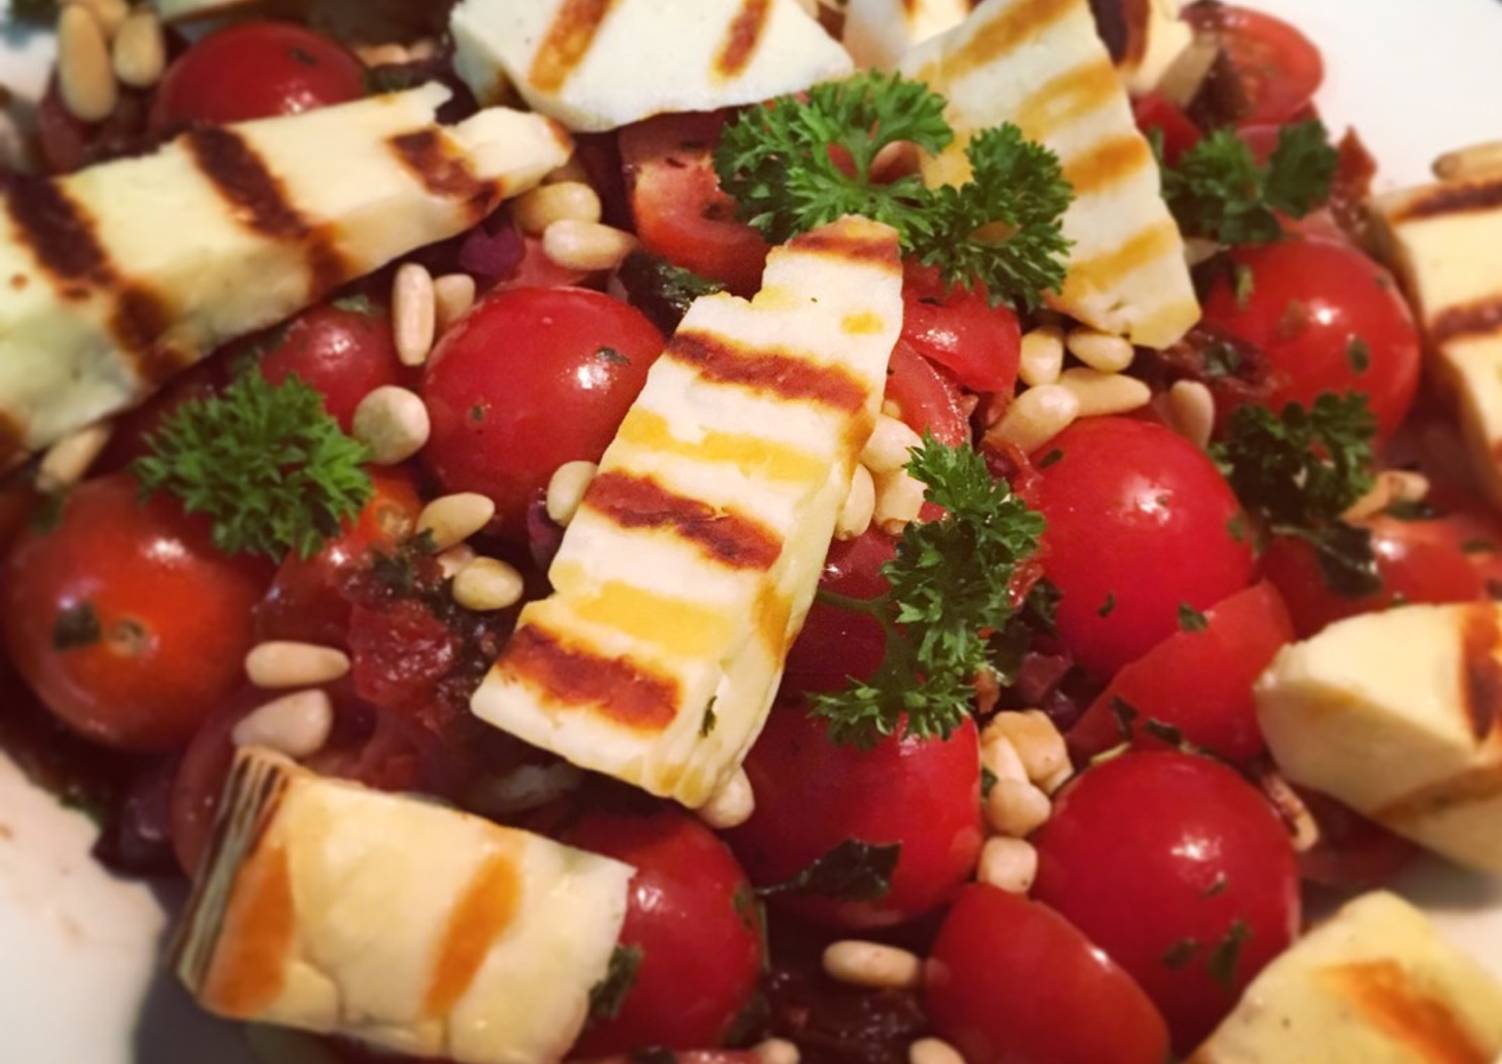 Grilled Halloumi, Tomato &amp; Olive Salad Recipe by ChrisO505 - Cookpad